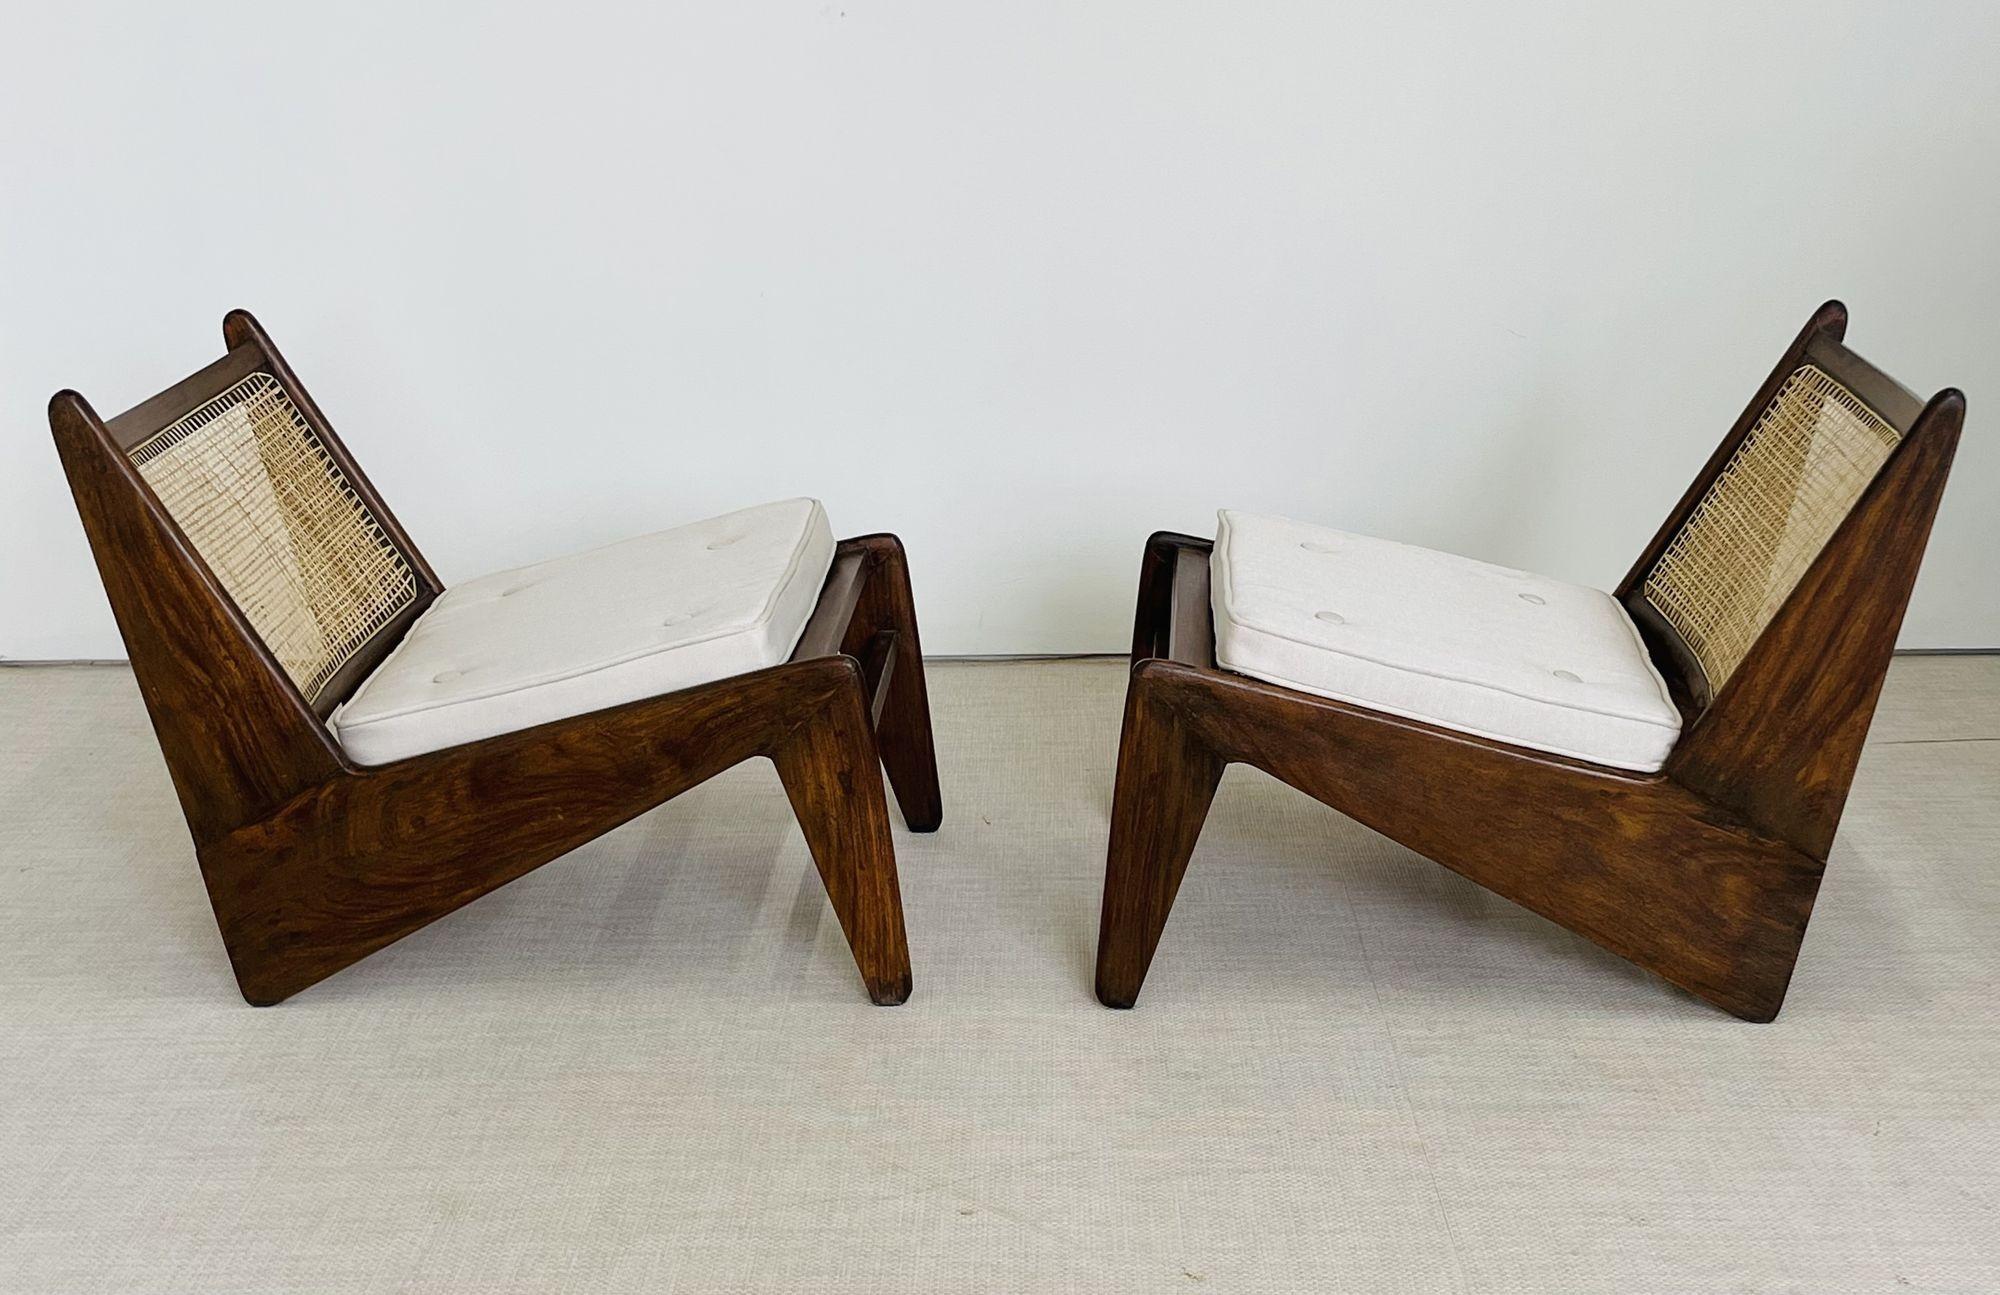 Pierre Jeanneret, French Mid-Century, Kangaroo Chairs, Teak, Cane, India, 1960s In Good Condition For Sale In Stamford, CT